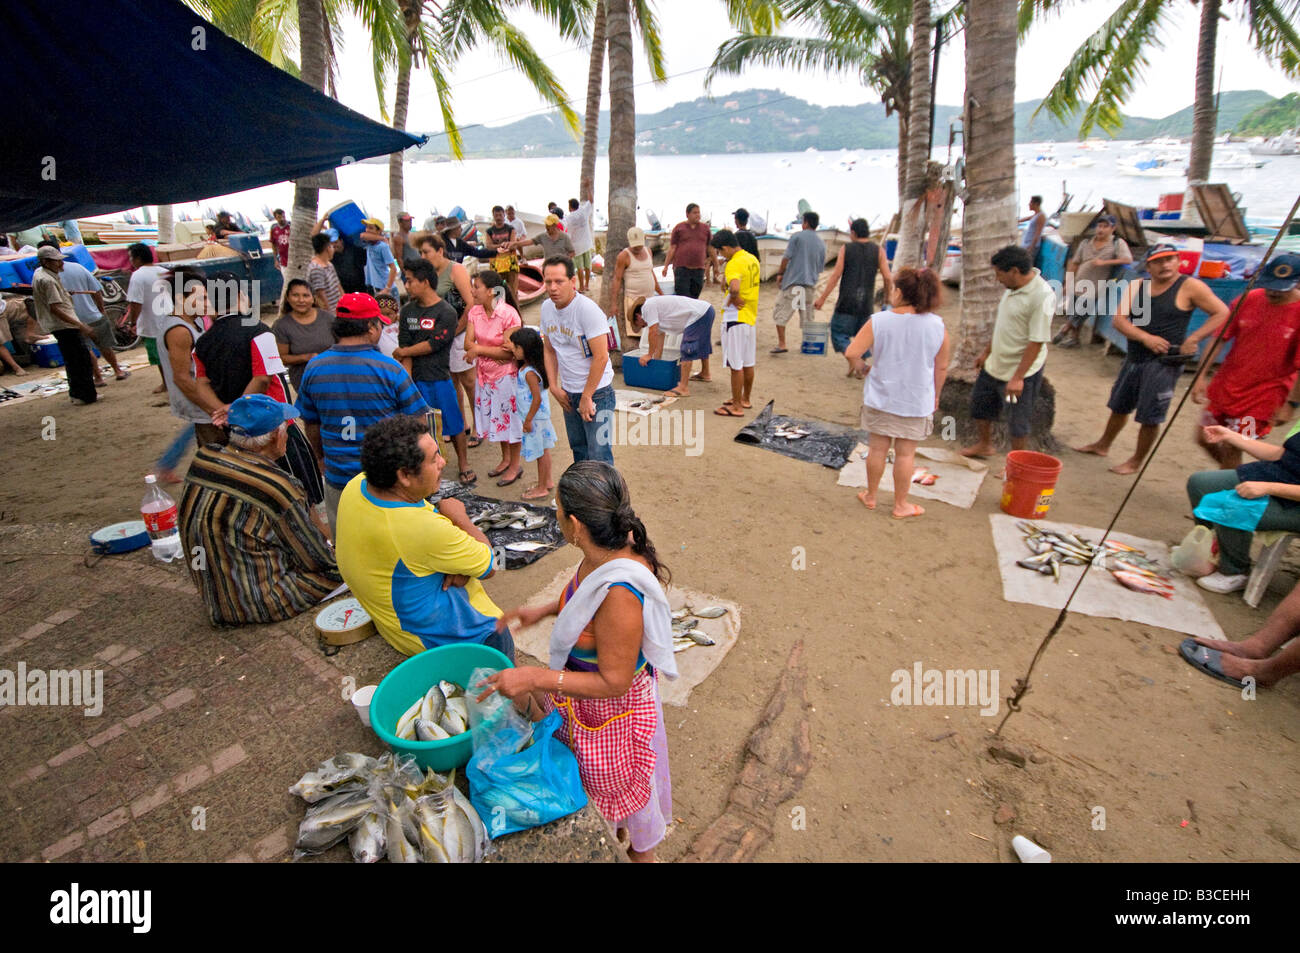 ZIHUATANEJO, Mexico - The fish market on the beach at Playa Principal, Zihuatanejo, Mexico. When the local fisherman return about dawn, they sell their catches at a beach fish market to early morning buyers. Being a traditional fishing village, the seafood in Zihuatanejo is superb. Stock Photo